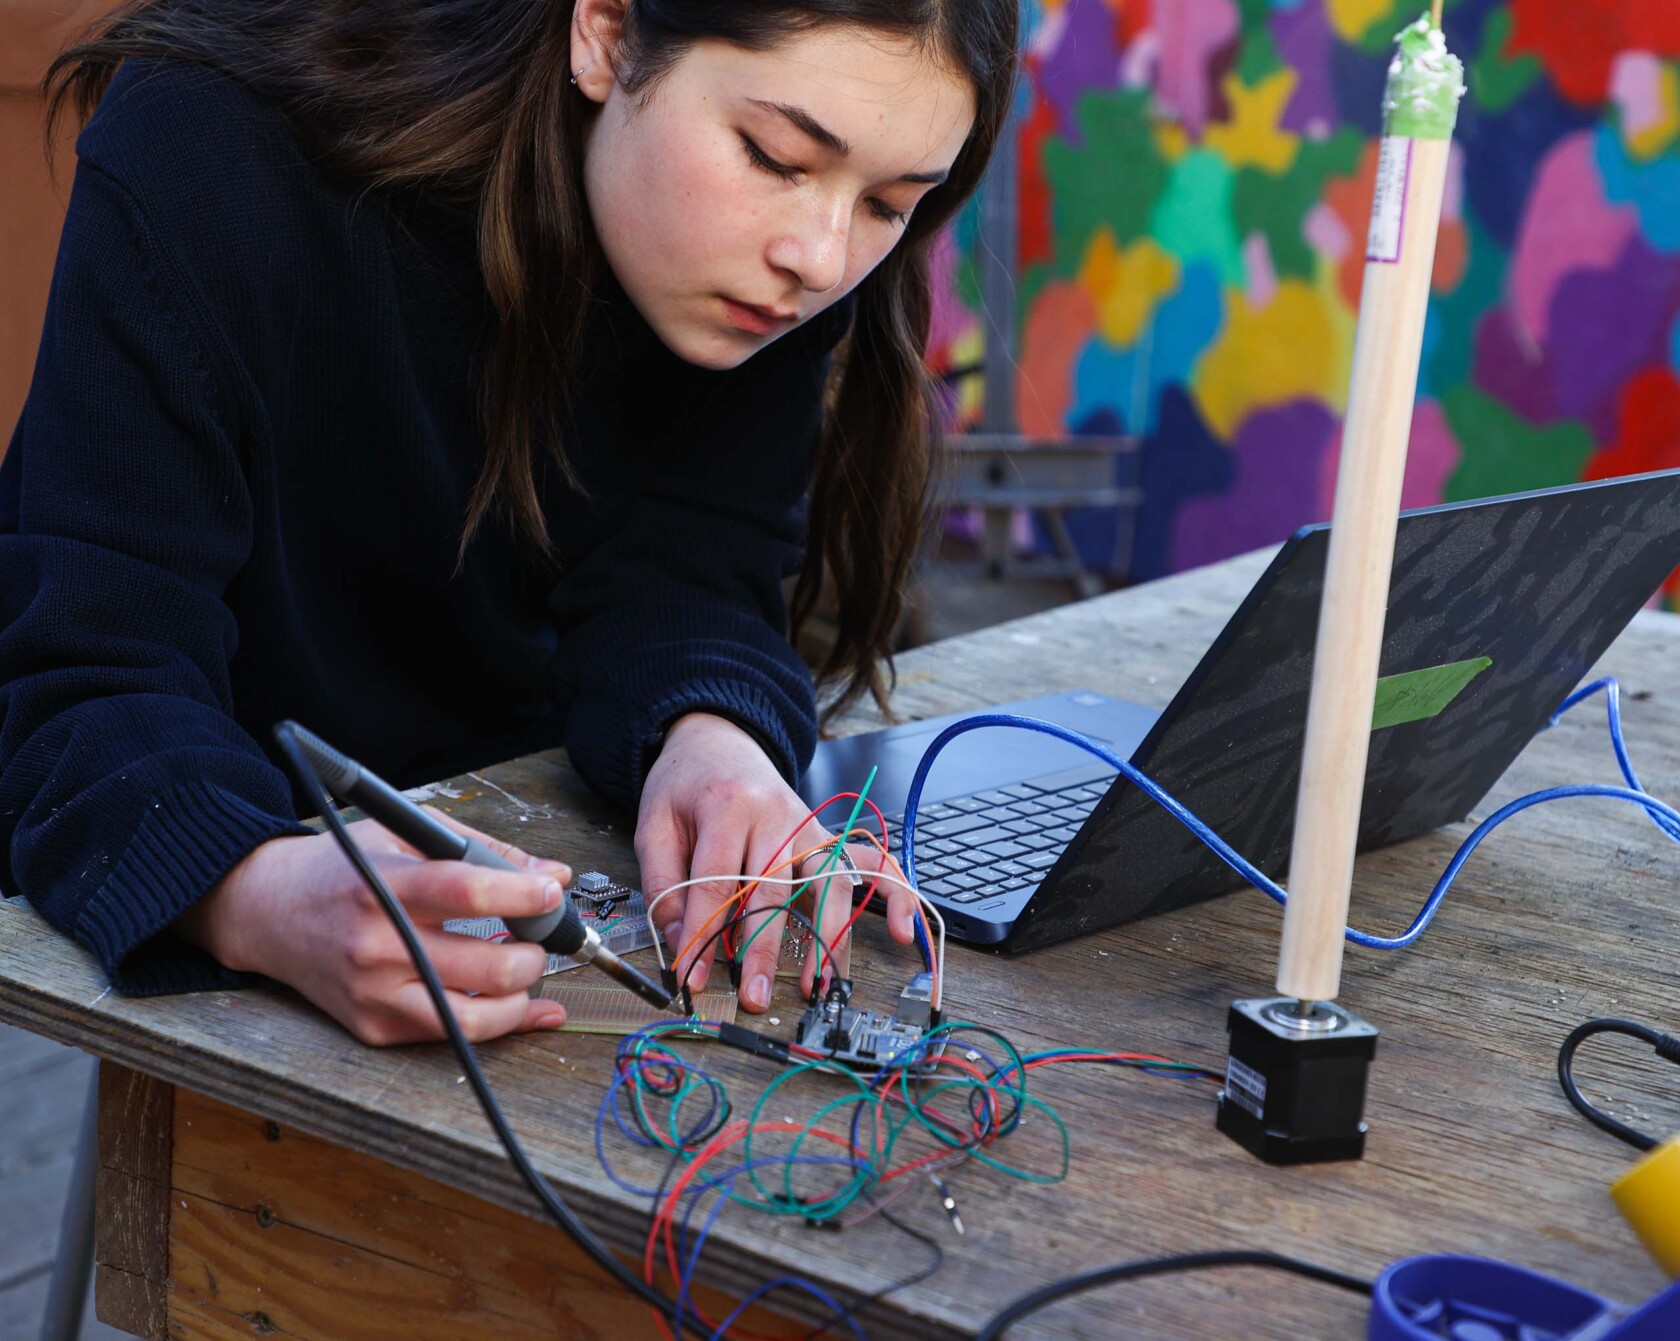 A student working with wires.